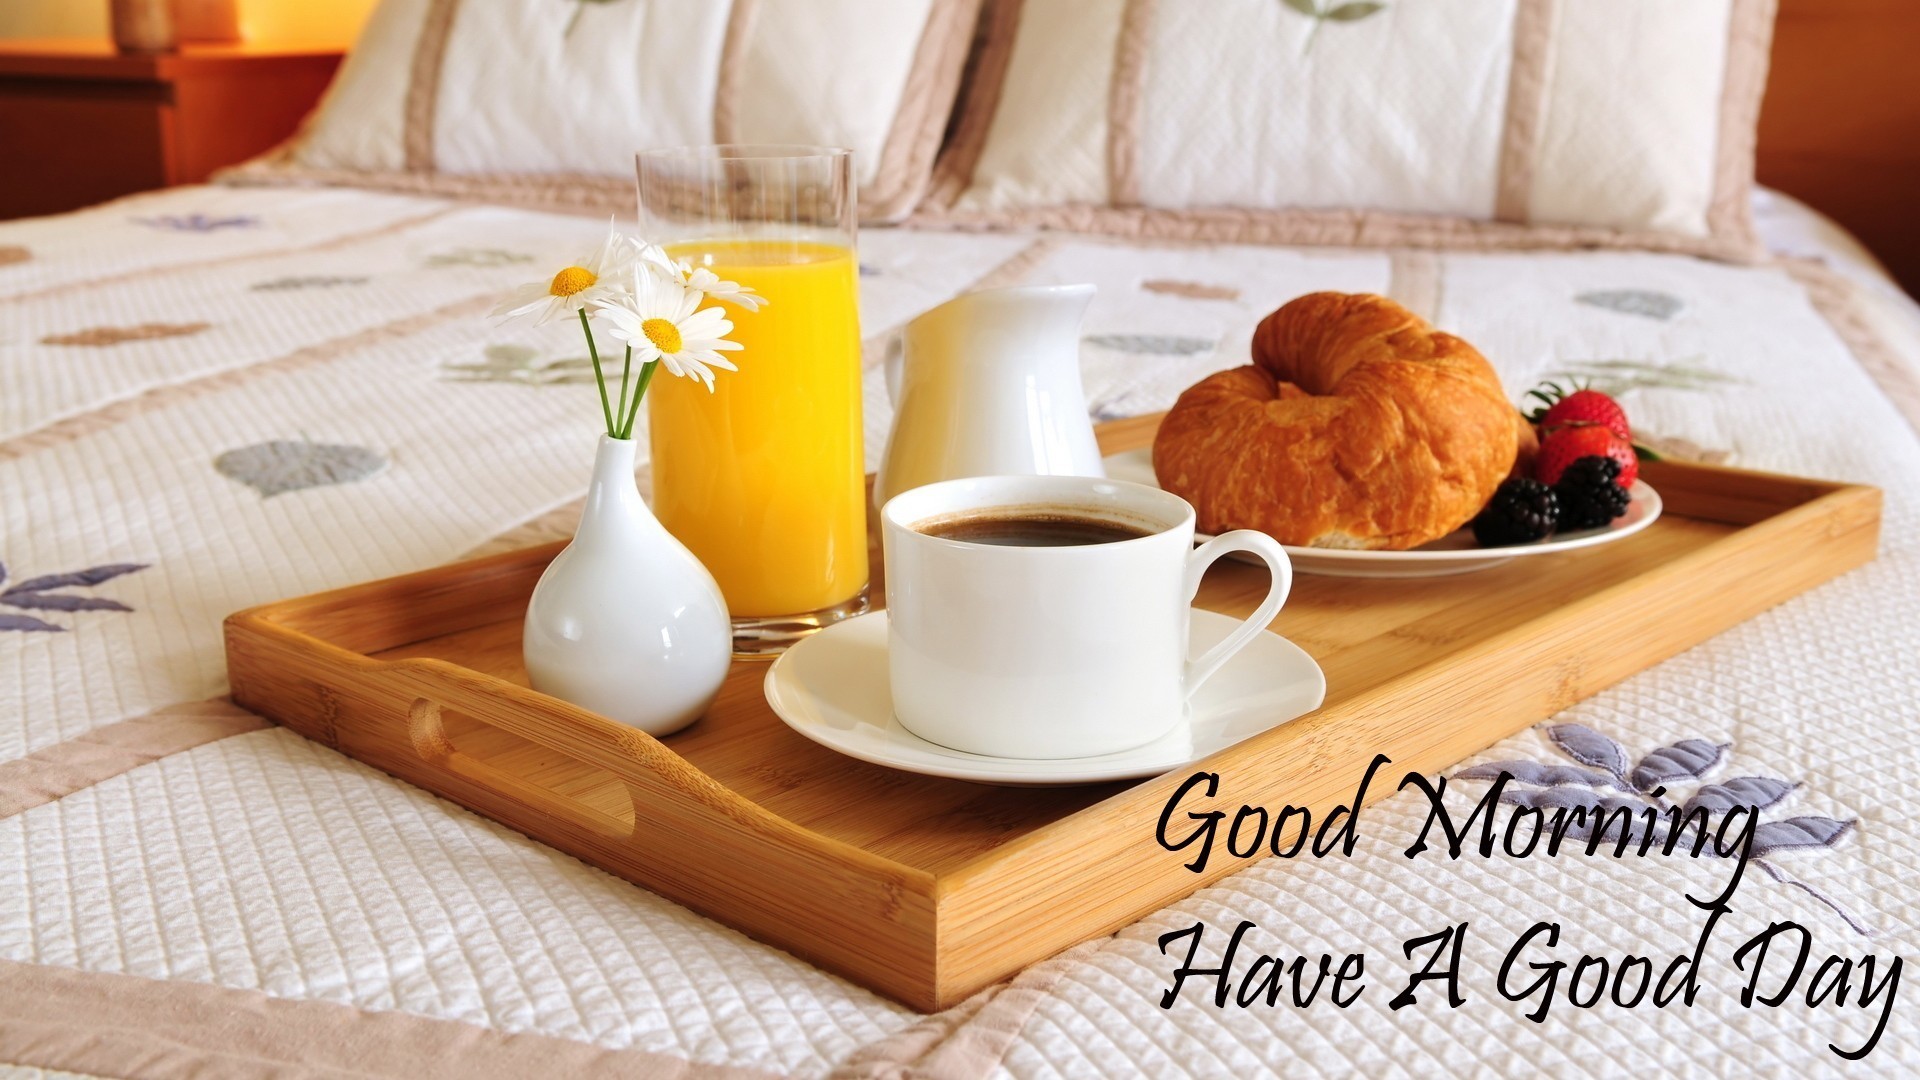 1920x1080 1920x1200 Good Morning Wishes, Quotes